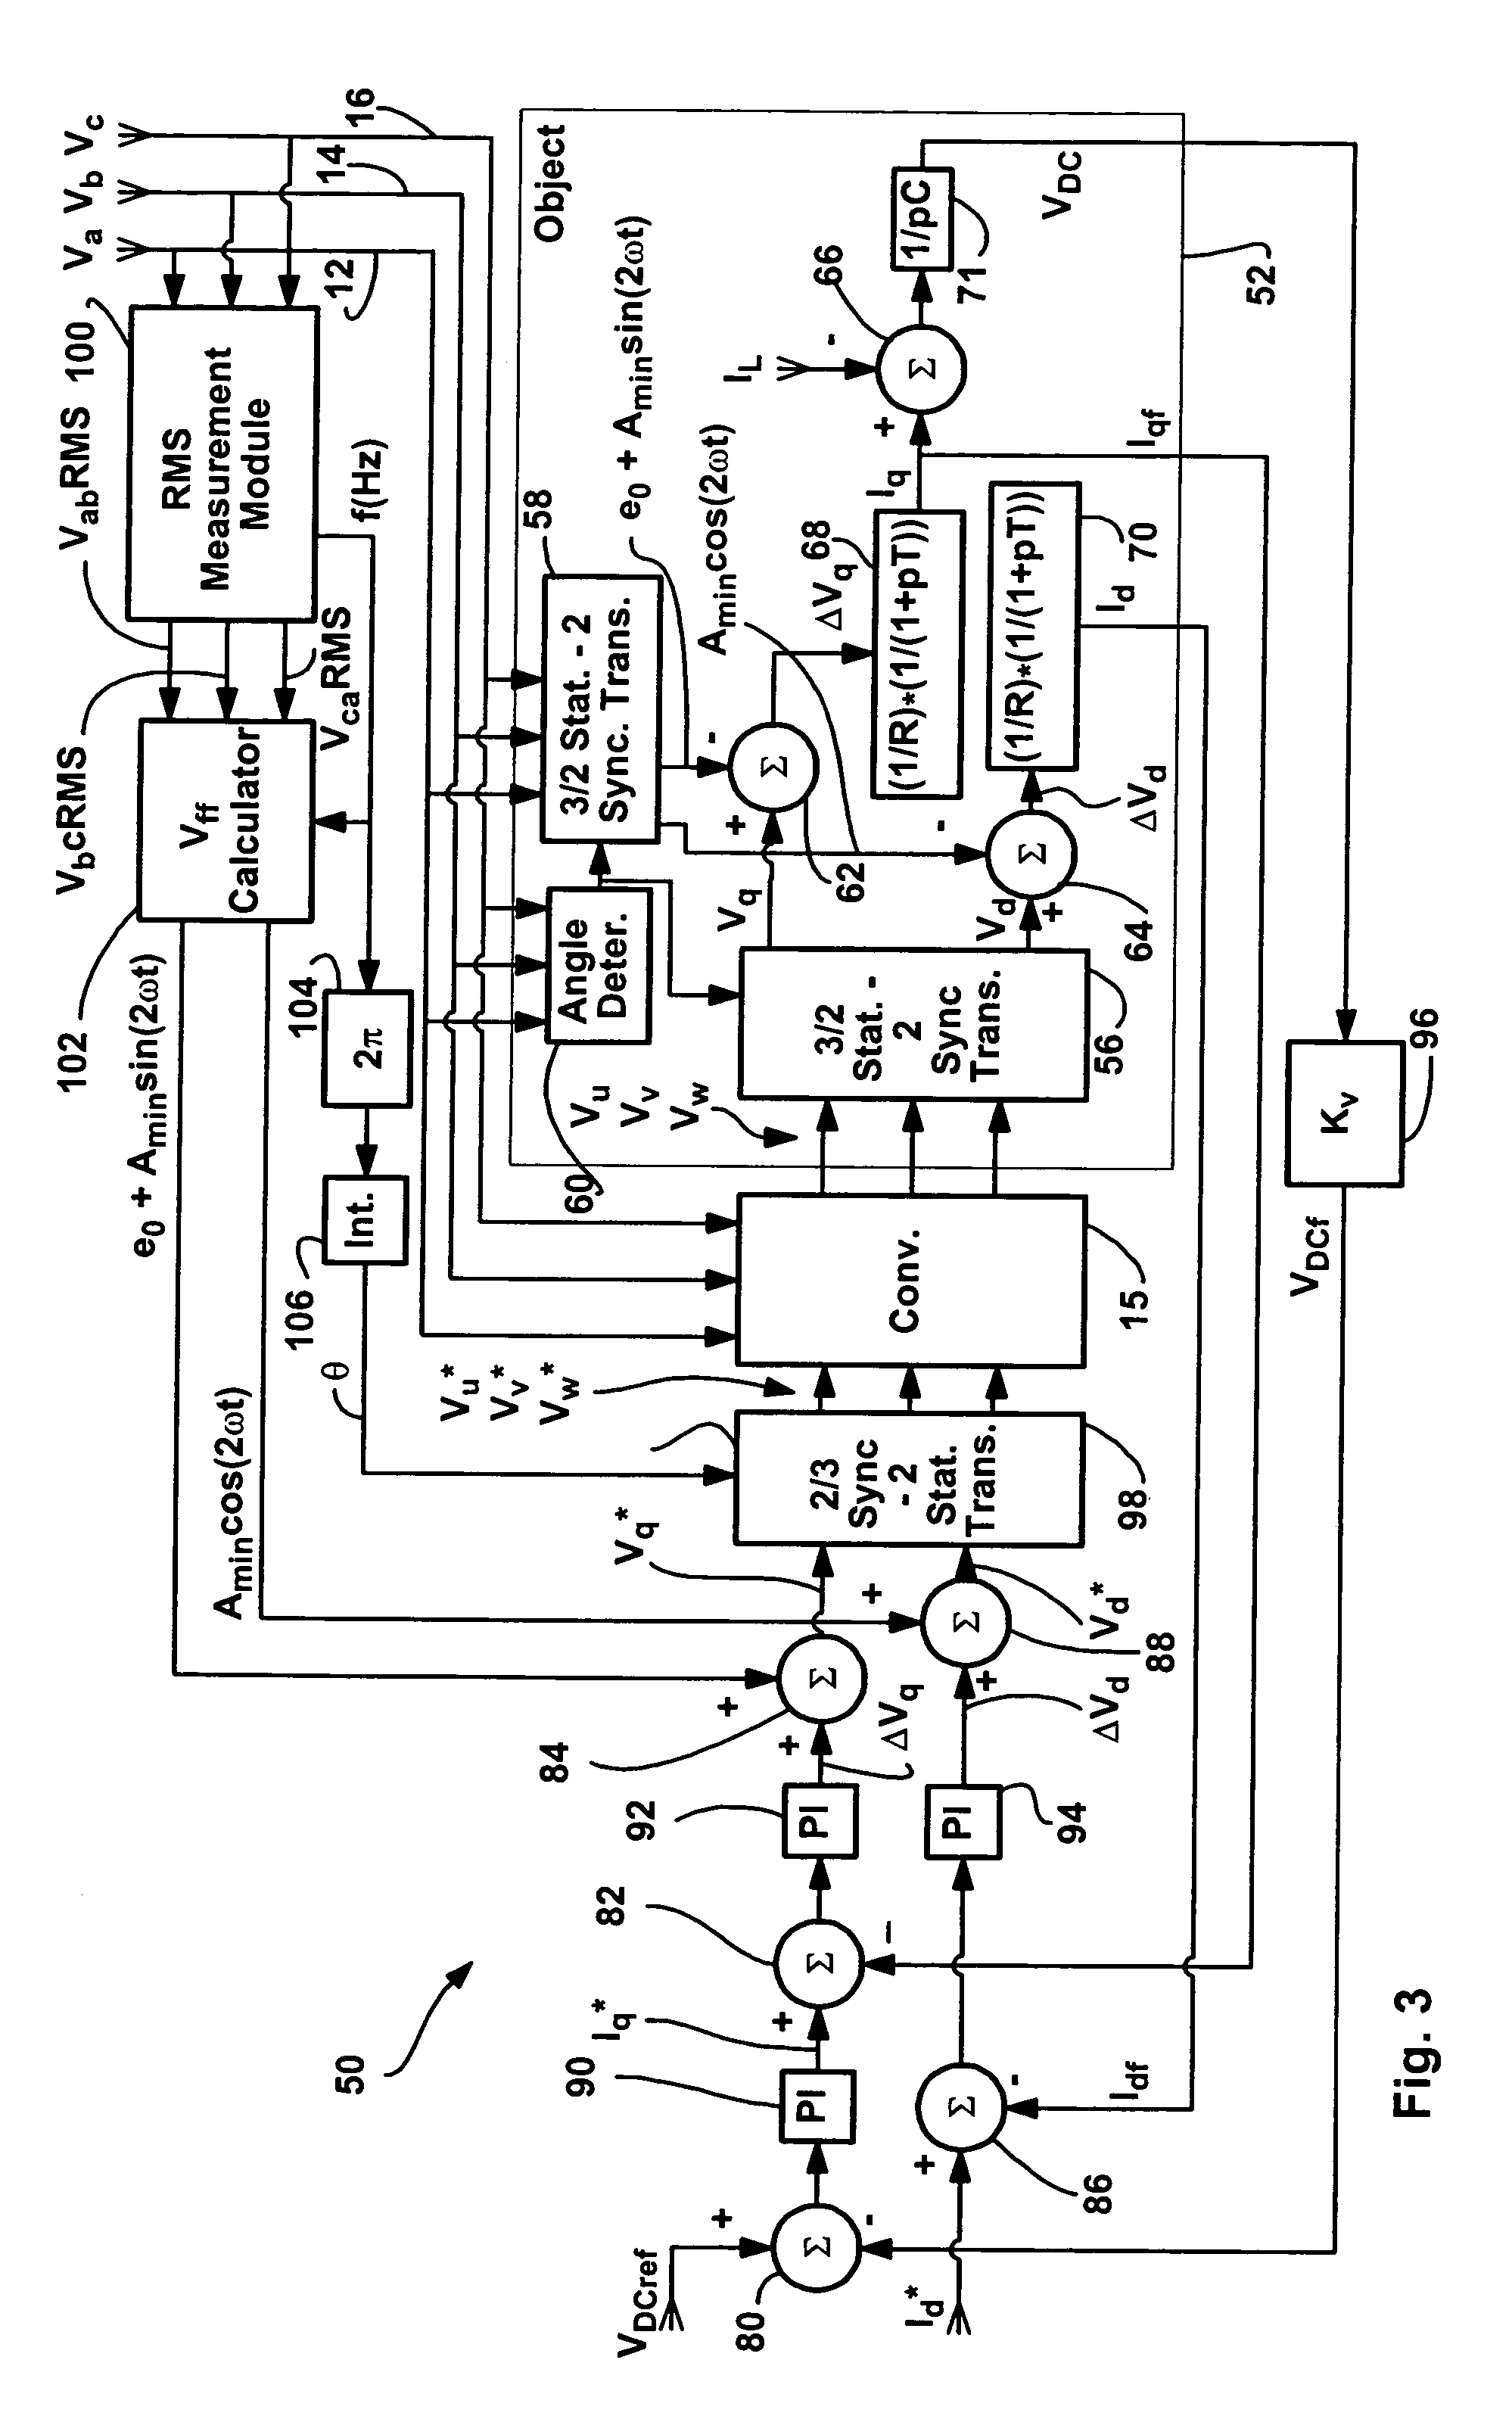 Method and apparatus for rejecting the second harmonic current in an active converter with an unbalanced AC line voltage source